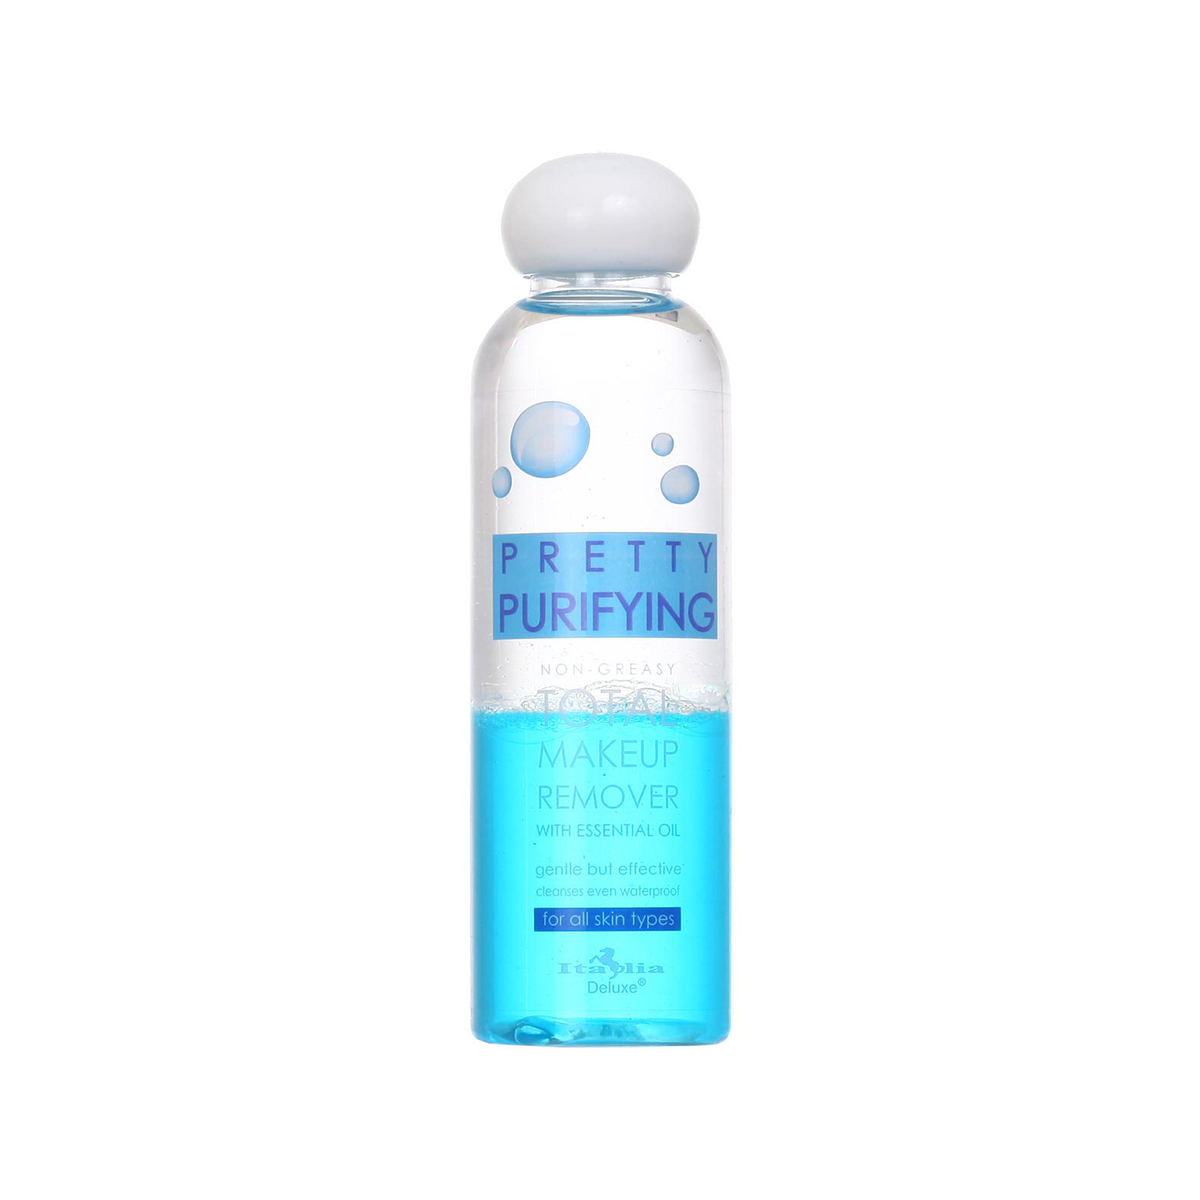 PRETTY PURIFYING TOTAL MAKEUP REMOVER